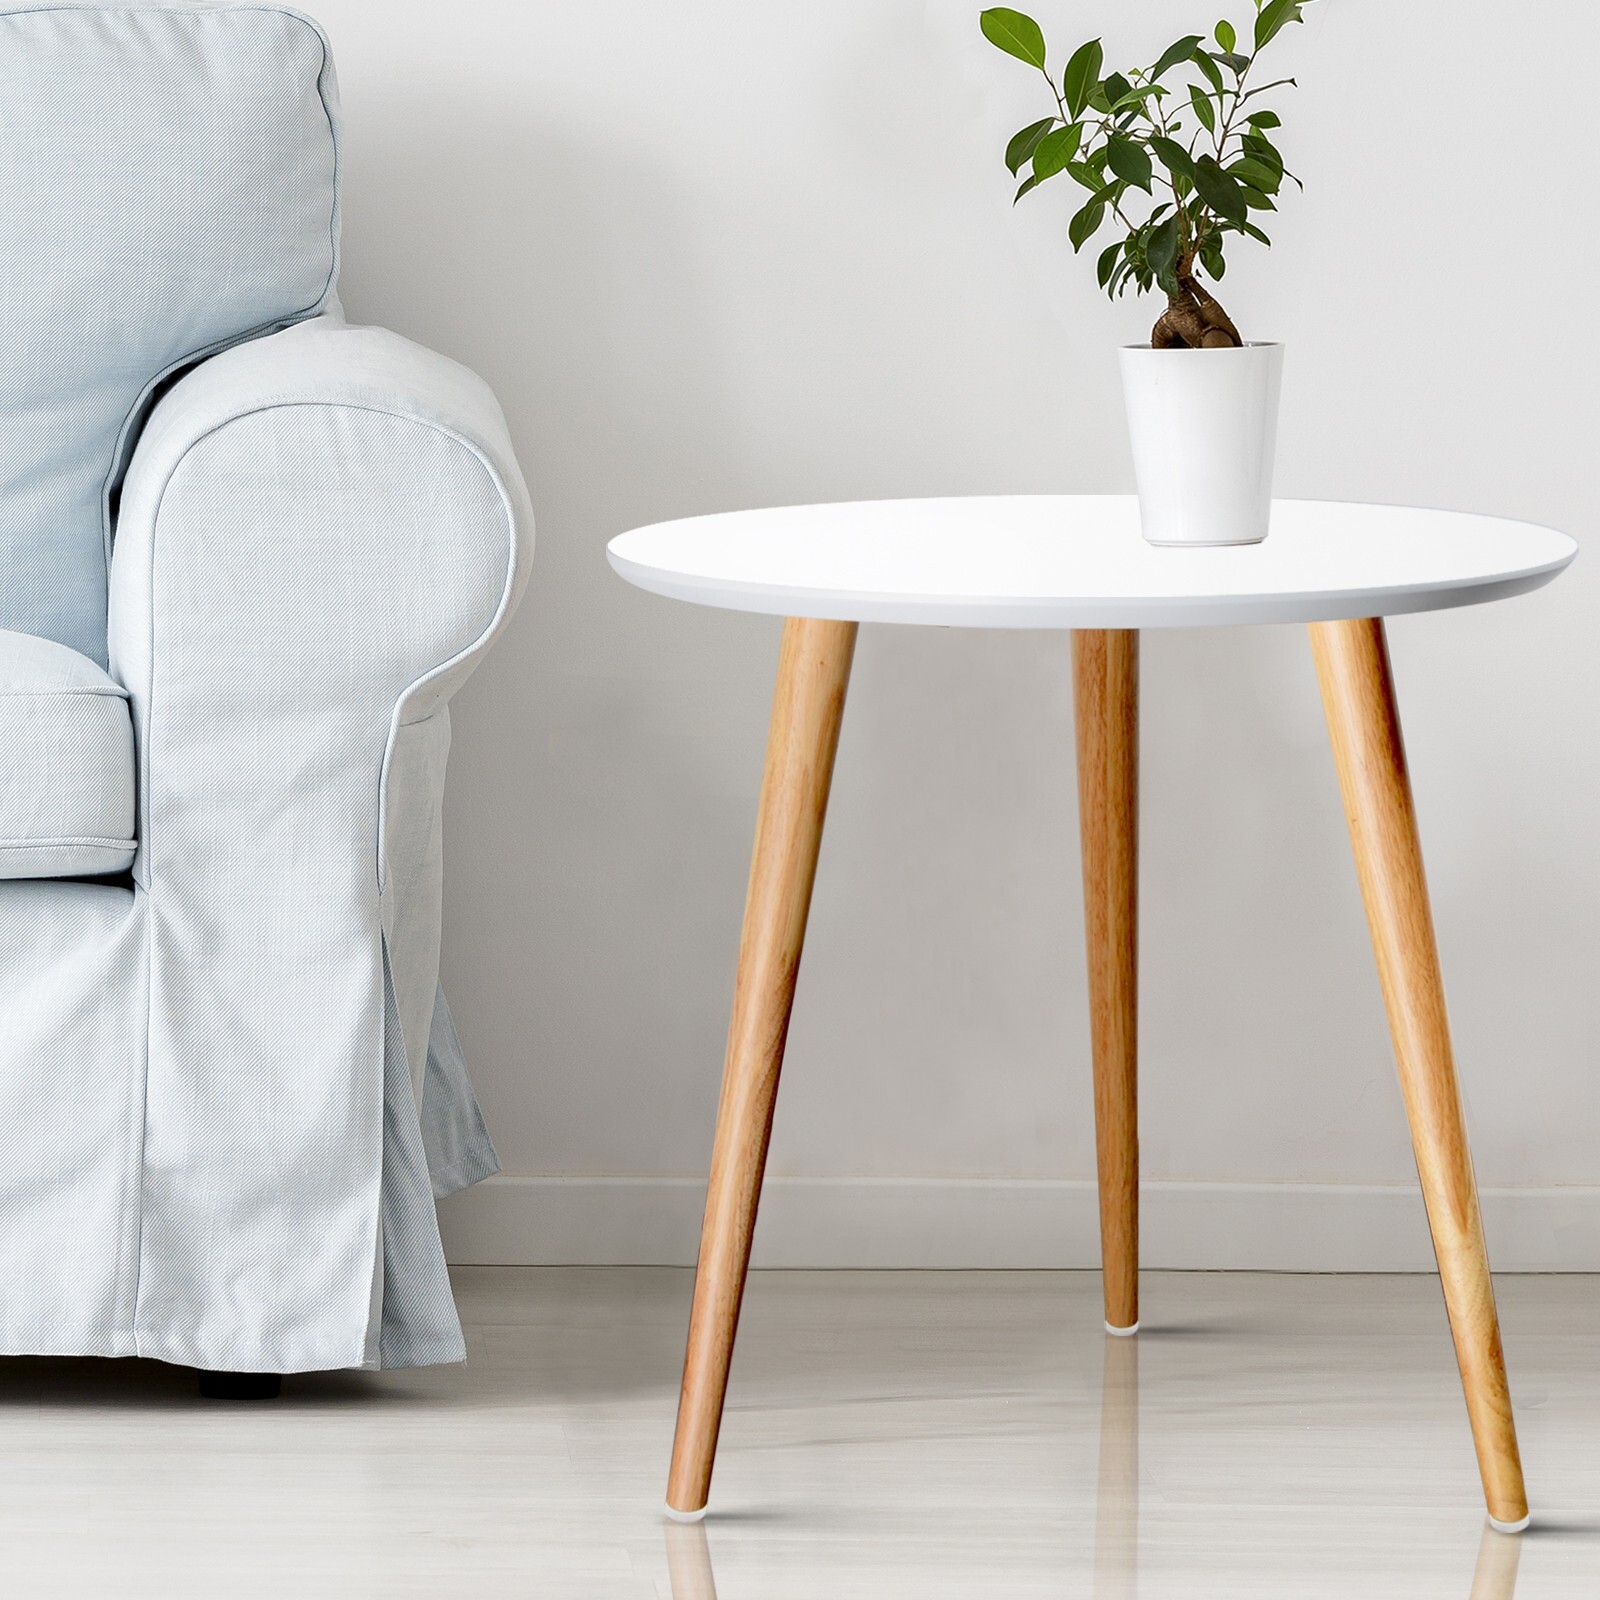 Round Wooden Side Table White